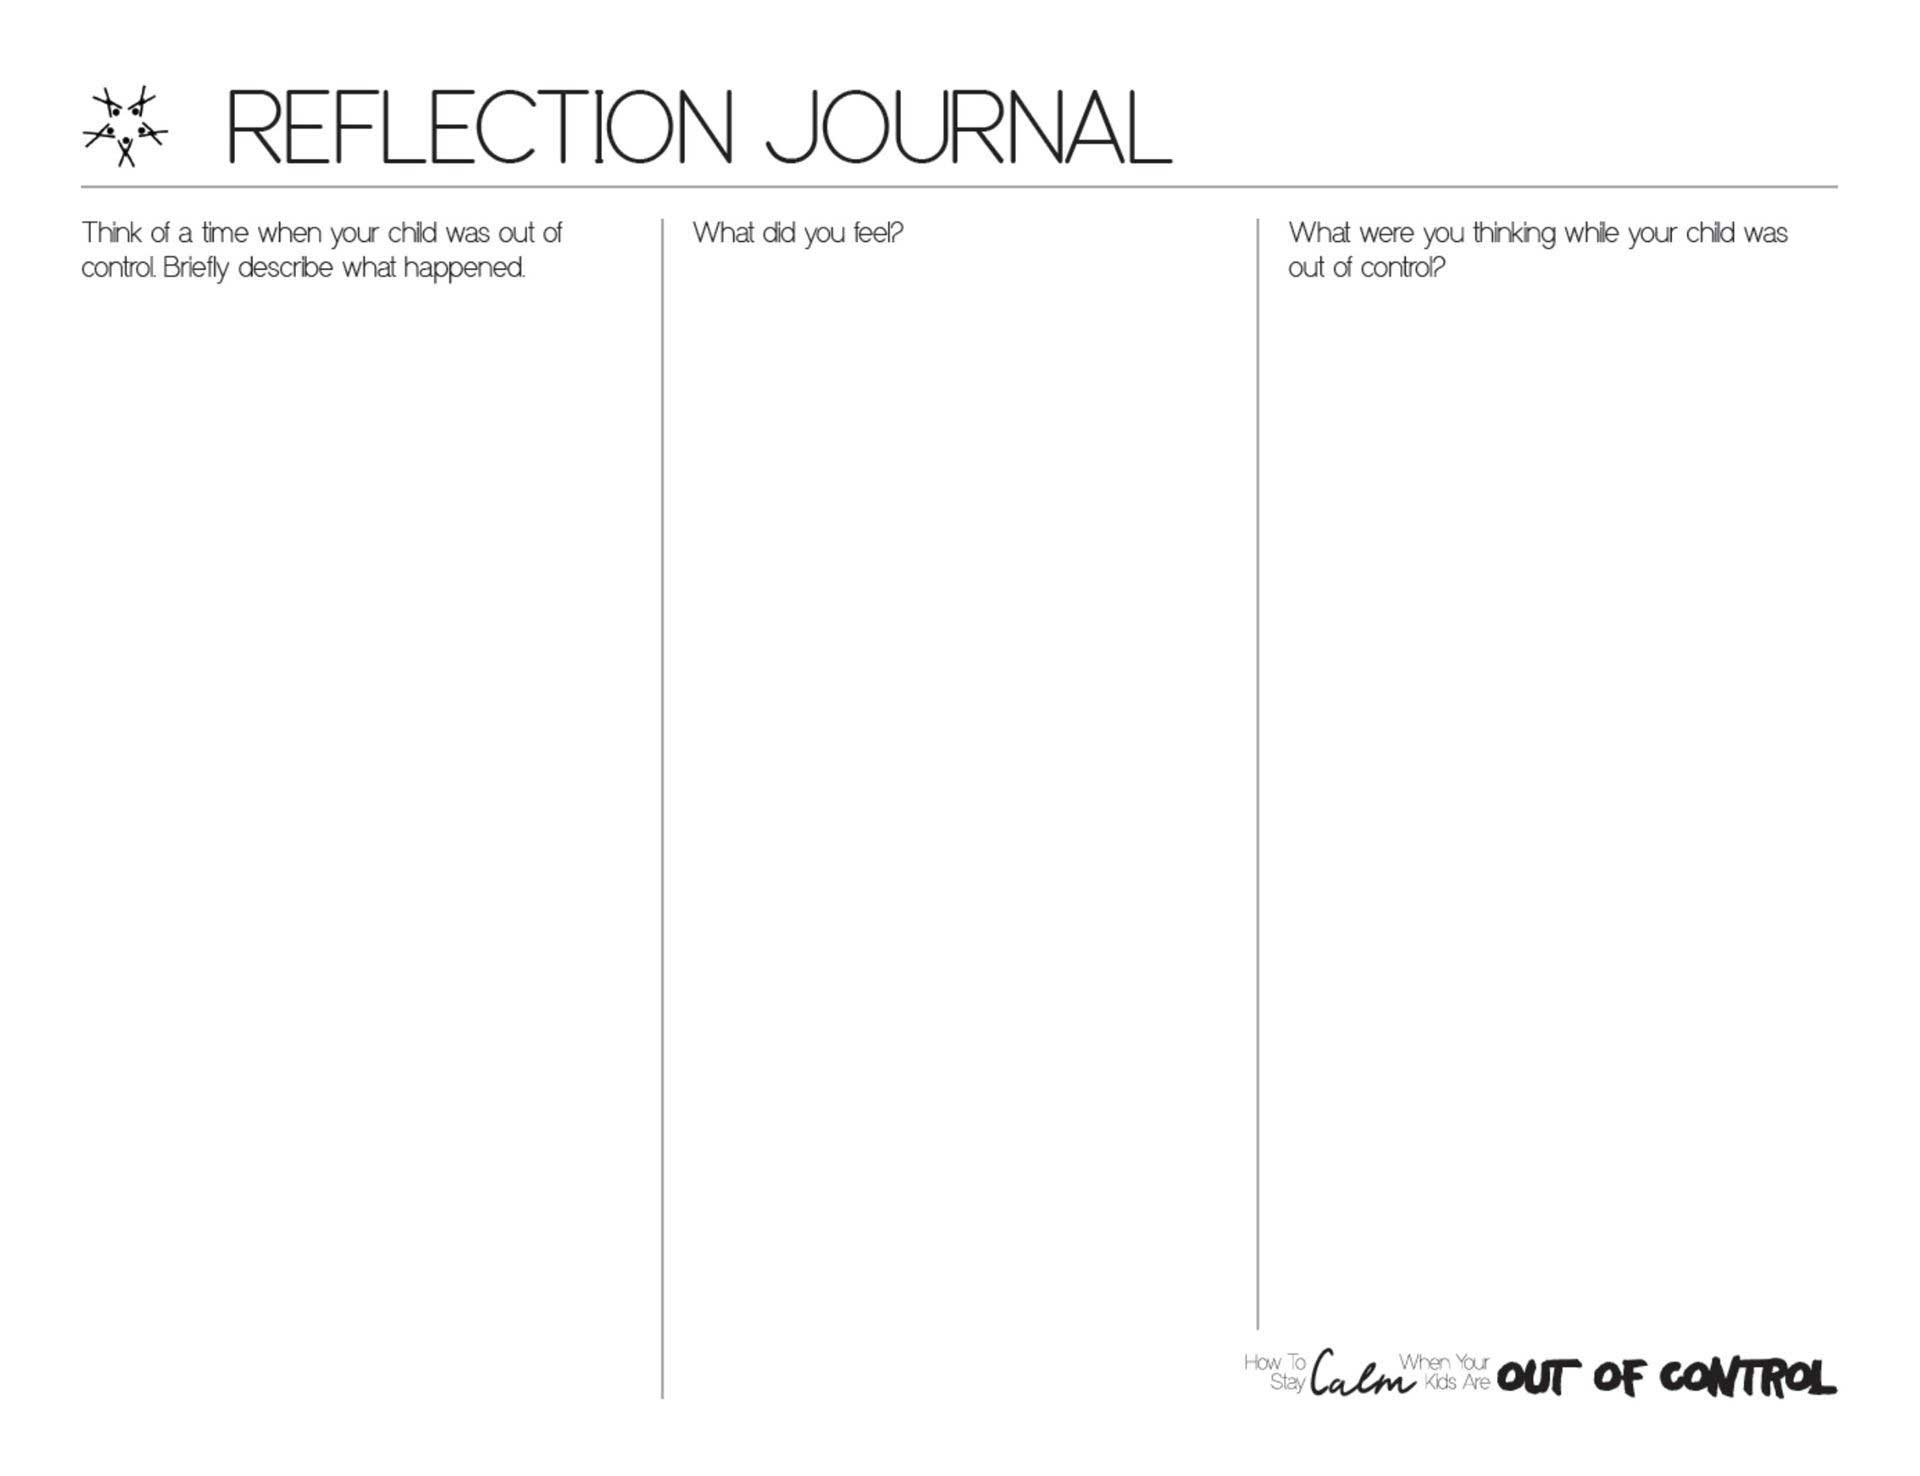 Screen shot of the reflection journal. It has 3 columns and each is labled with a question.